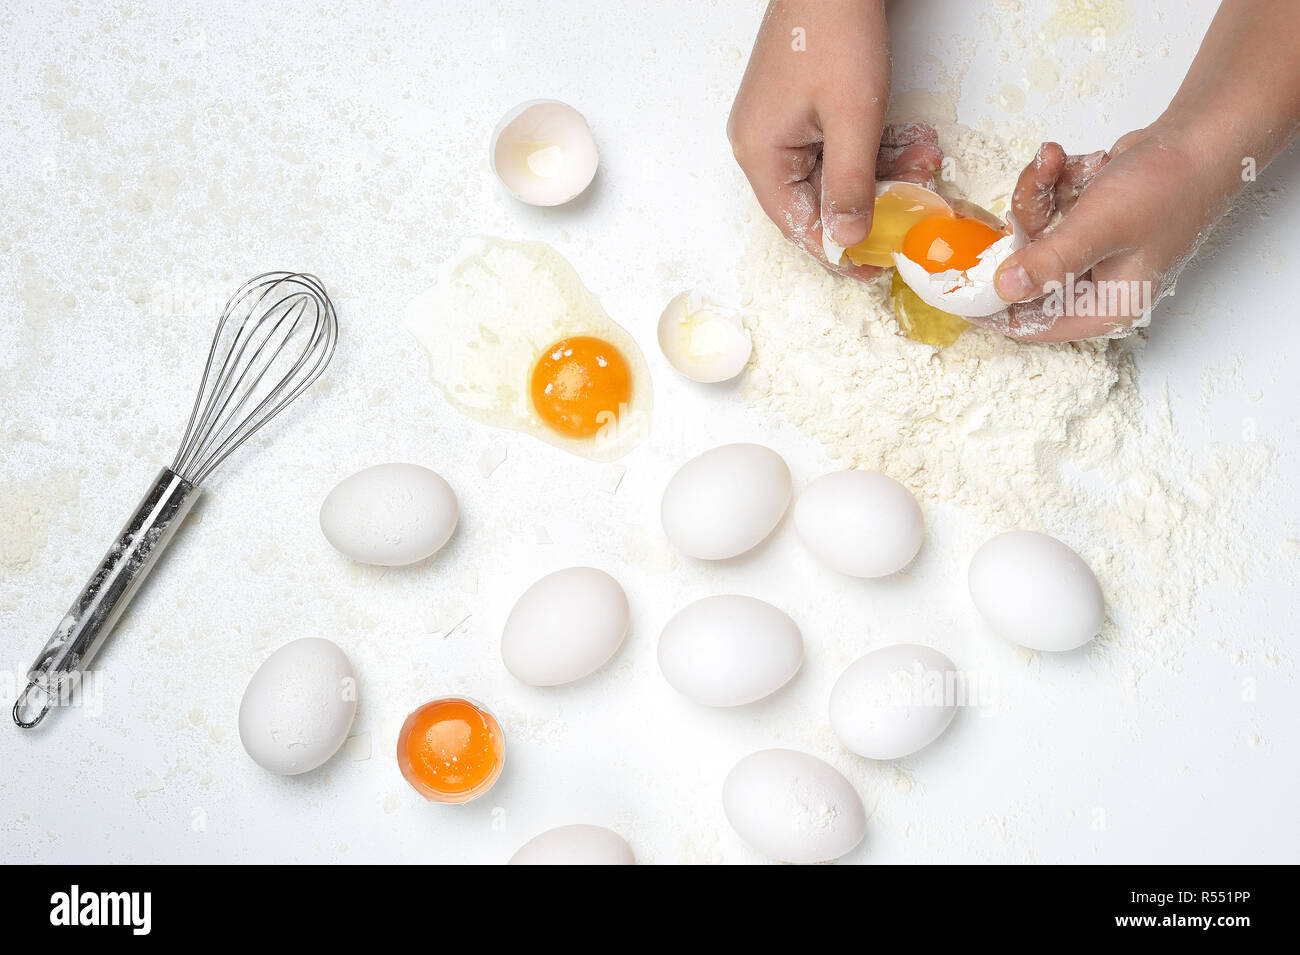 Basic ingredients into fresh pasta or dough with only  hands, eggs, flour,whisker on the white background. Flour on the work surface. Stock Photo